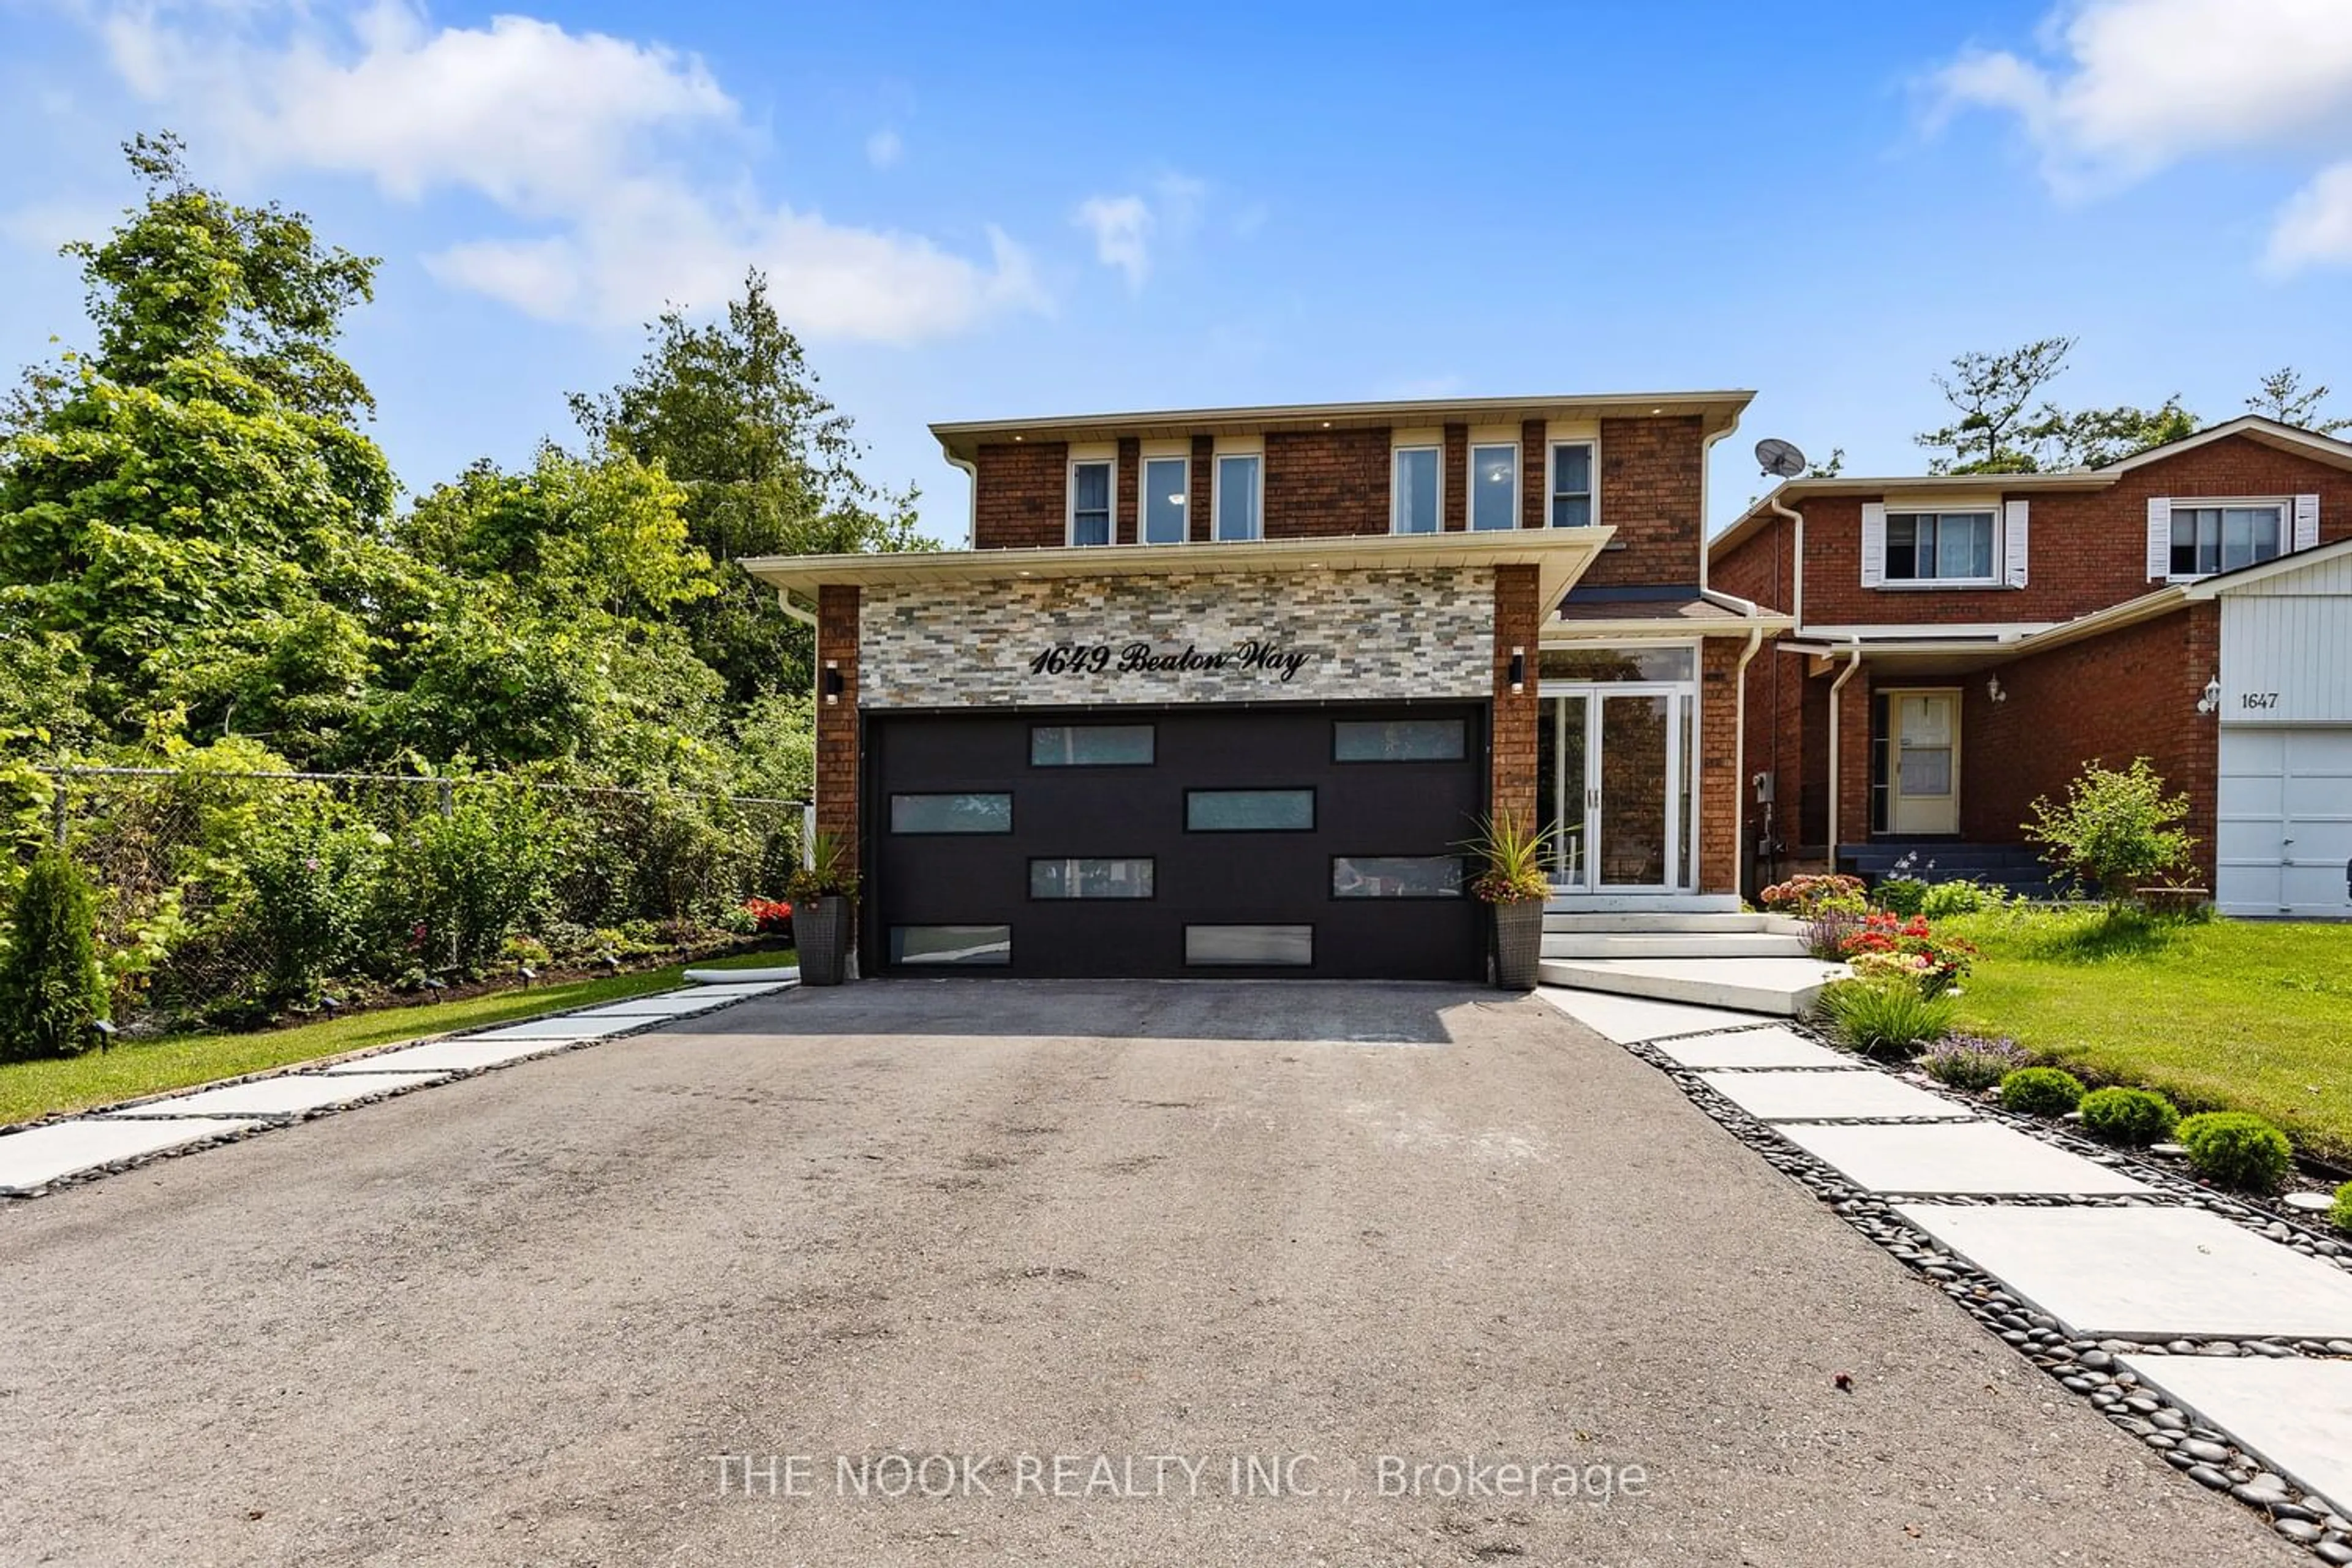 Home with brick exterior material for 1649 Beaton Way, Pickering Ontario L1X 1X7